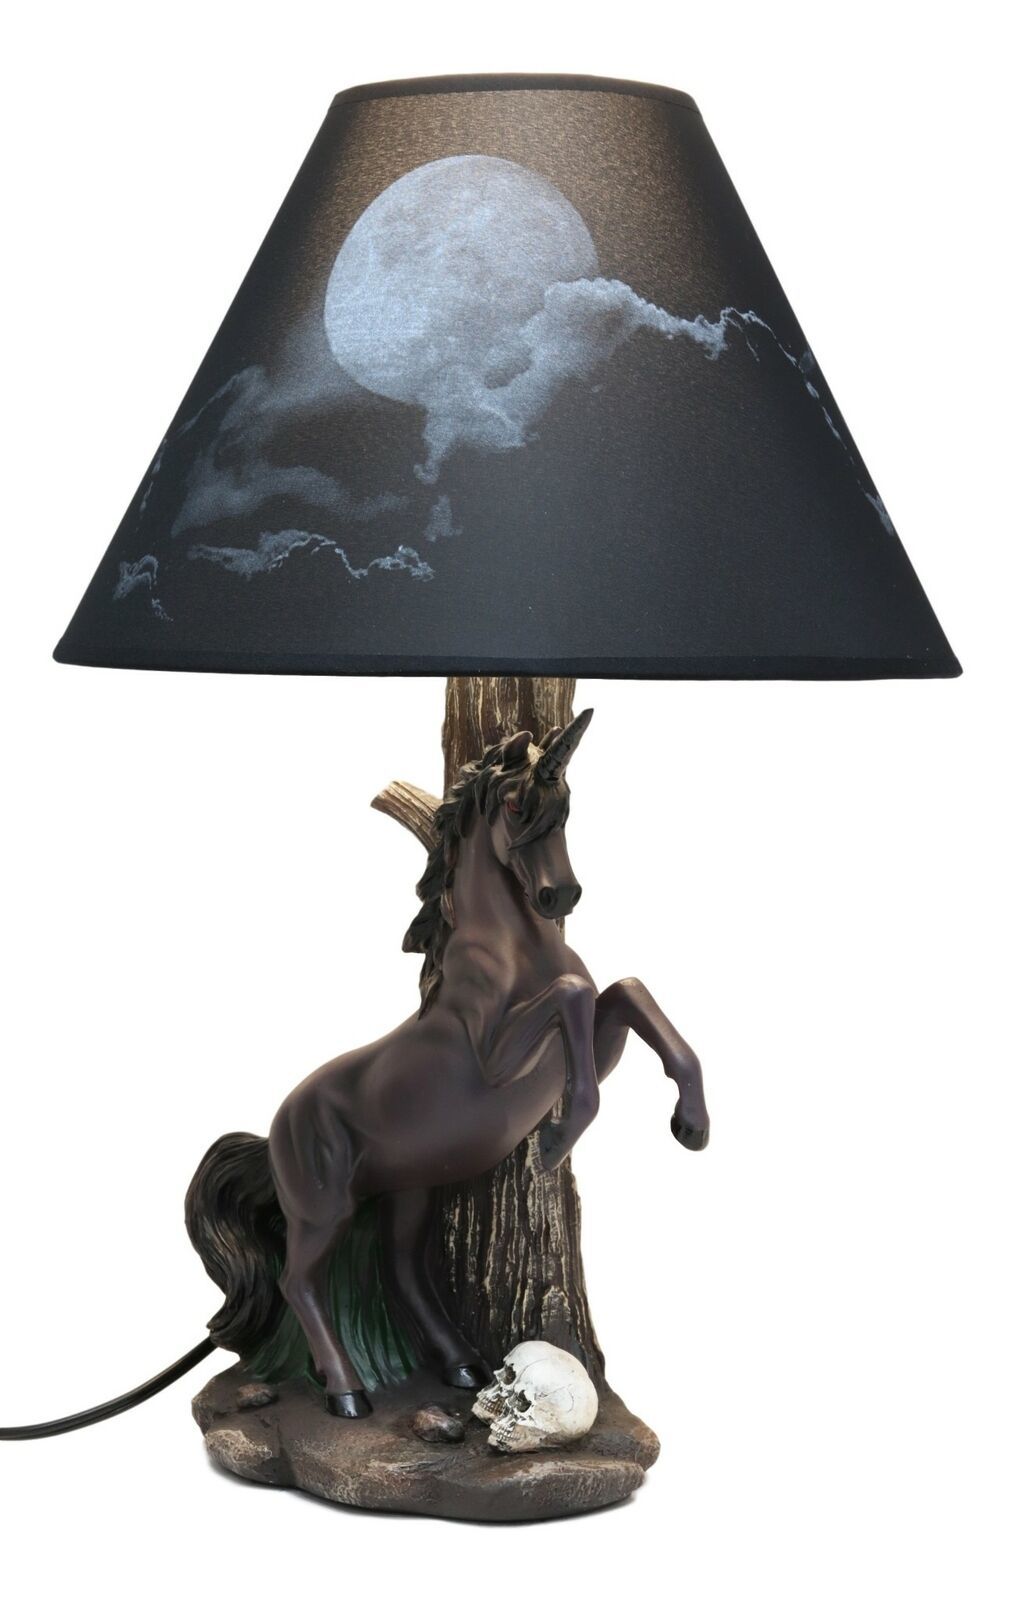 Eclipse Rearing Macabre Black Unicorn Desktop Table Lamp with Full Moon Shade